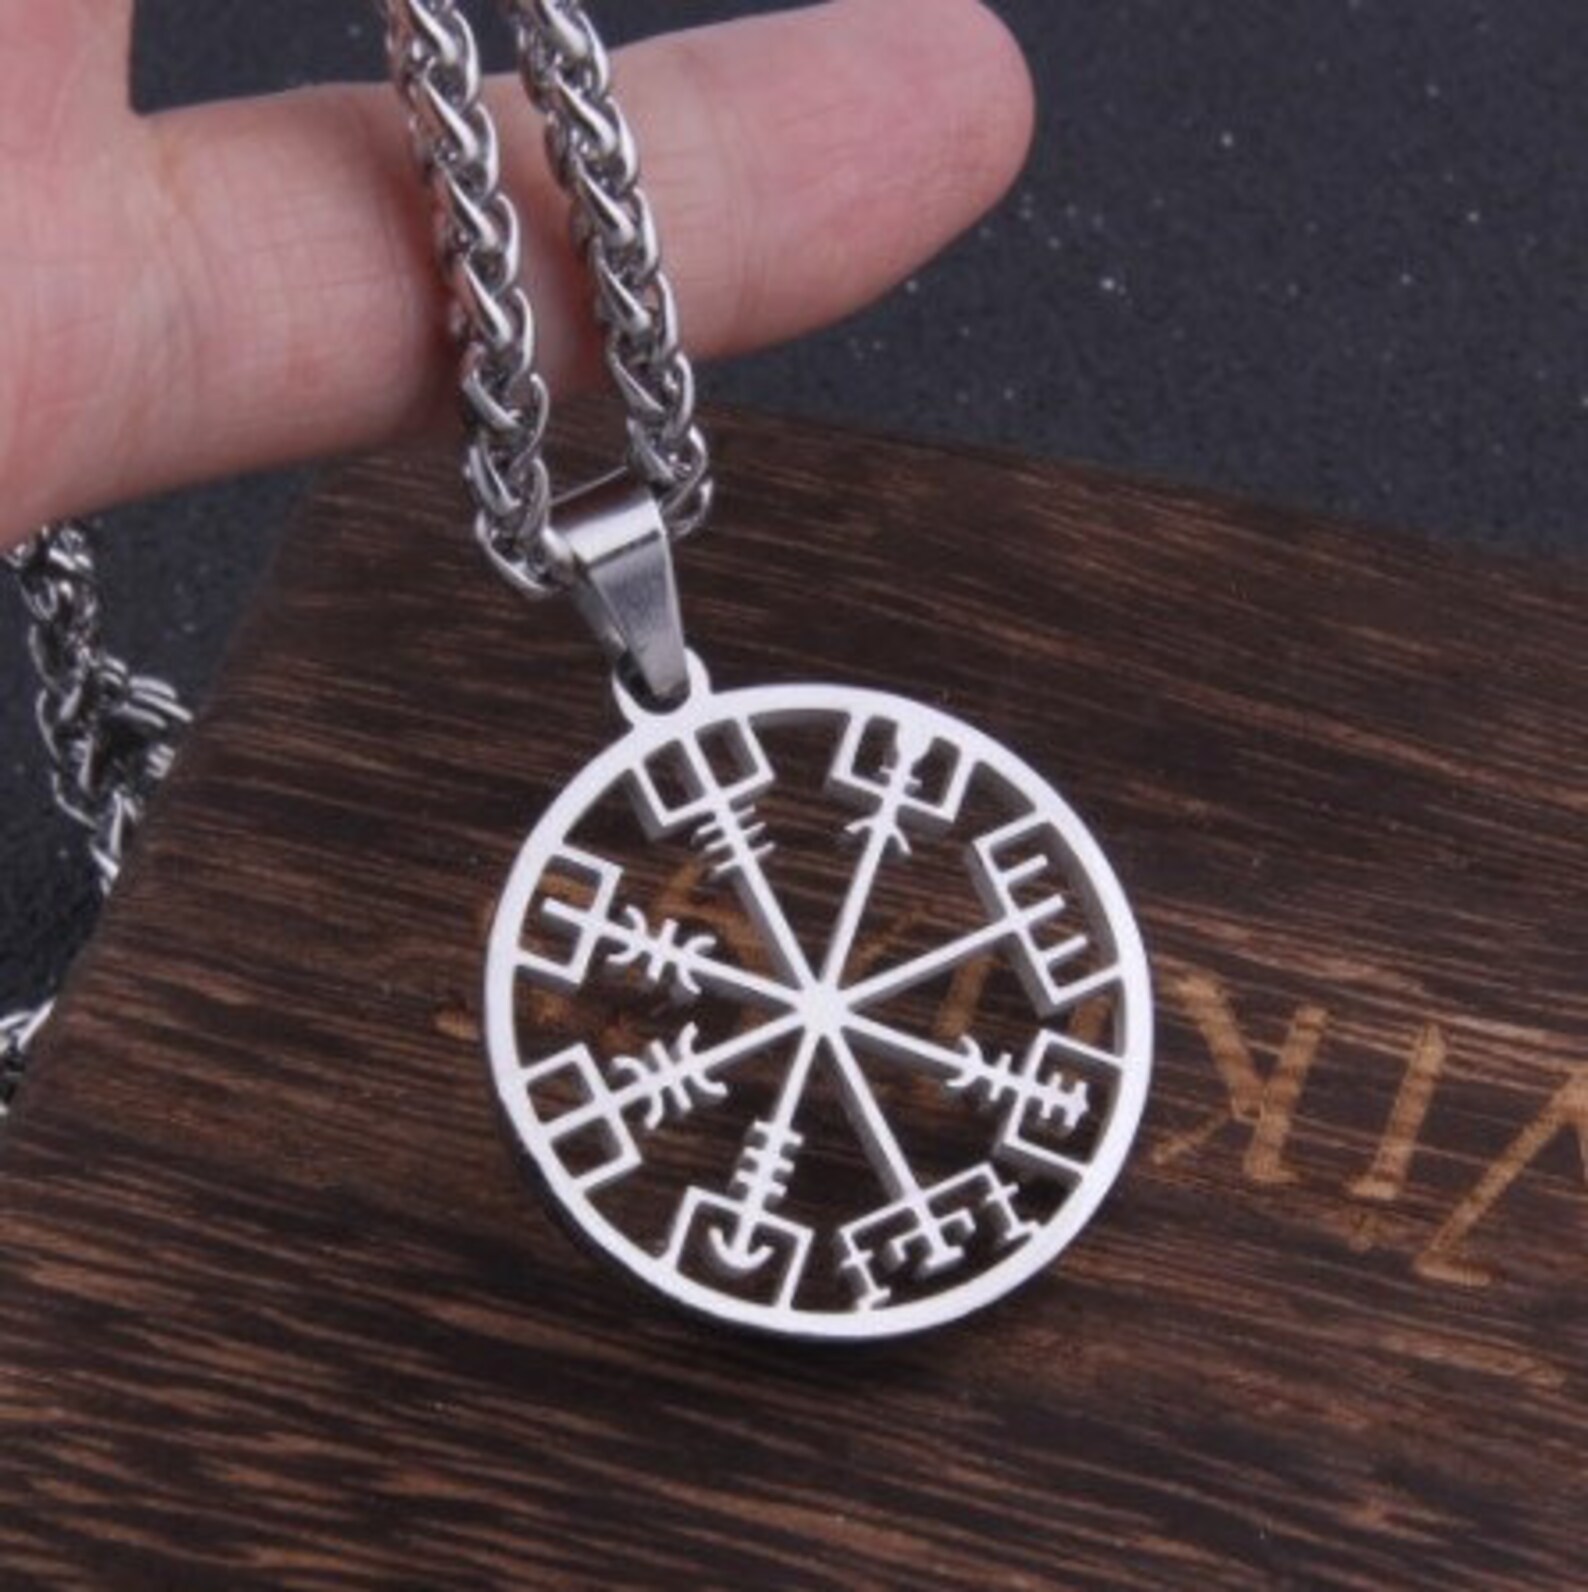 Stainless steel Viking vegvisir necklace gift with wooden | Etsy